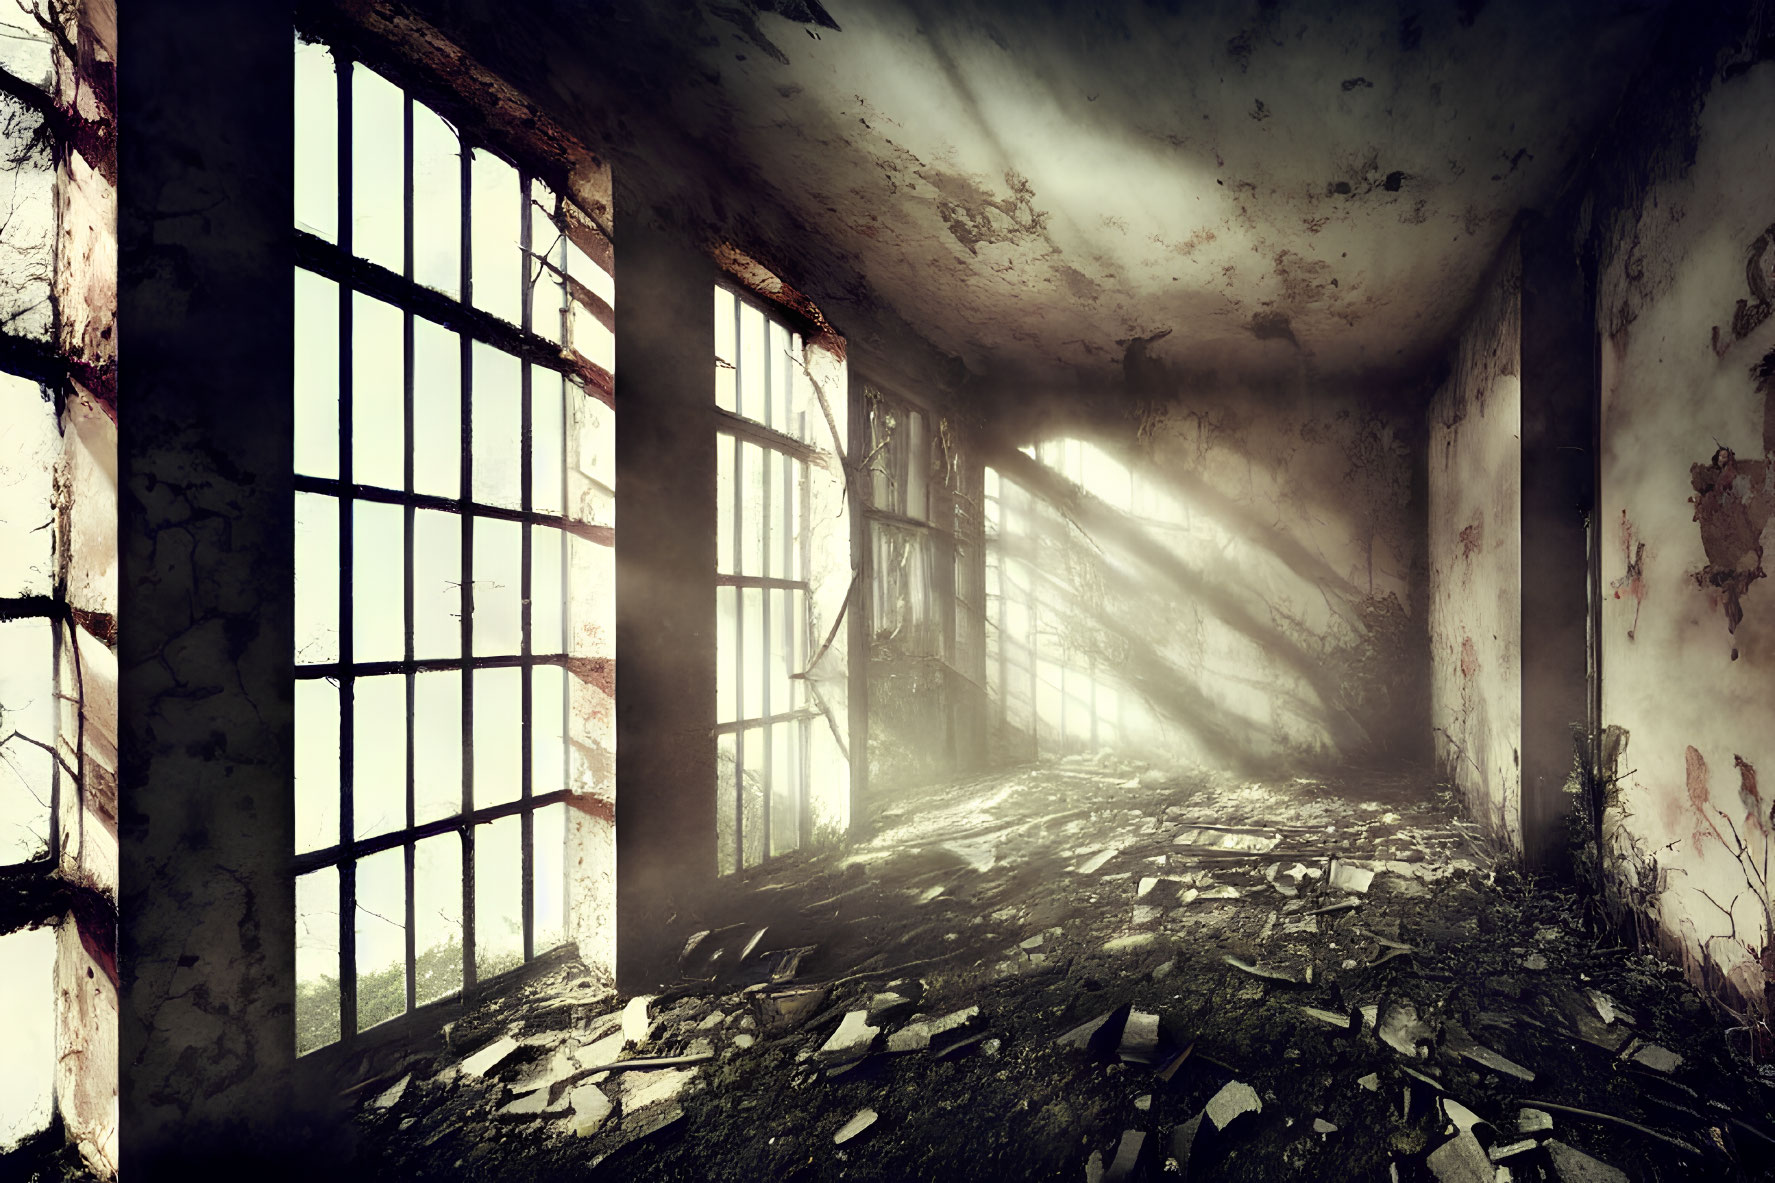 Abandoned room with sunlight, debris, and peeling walls